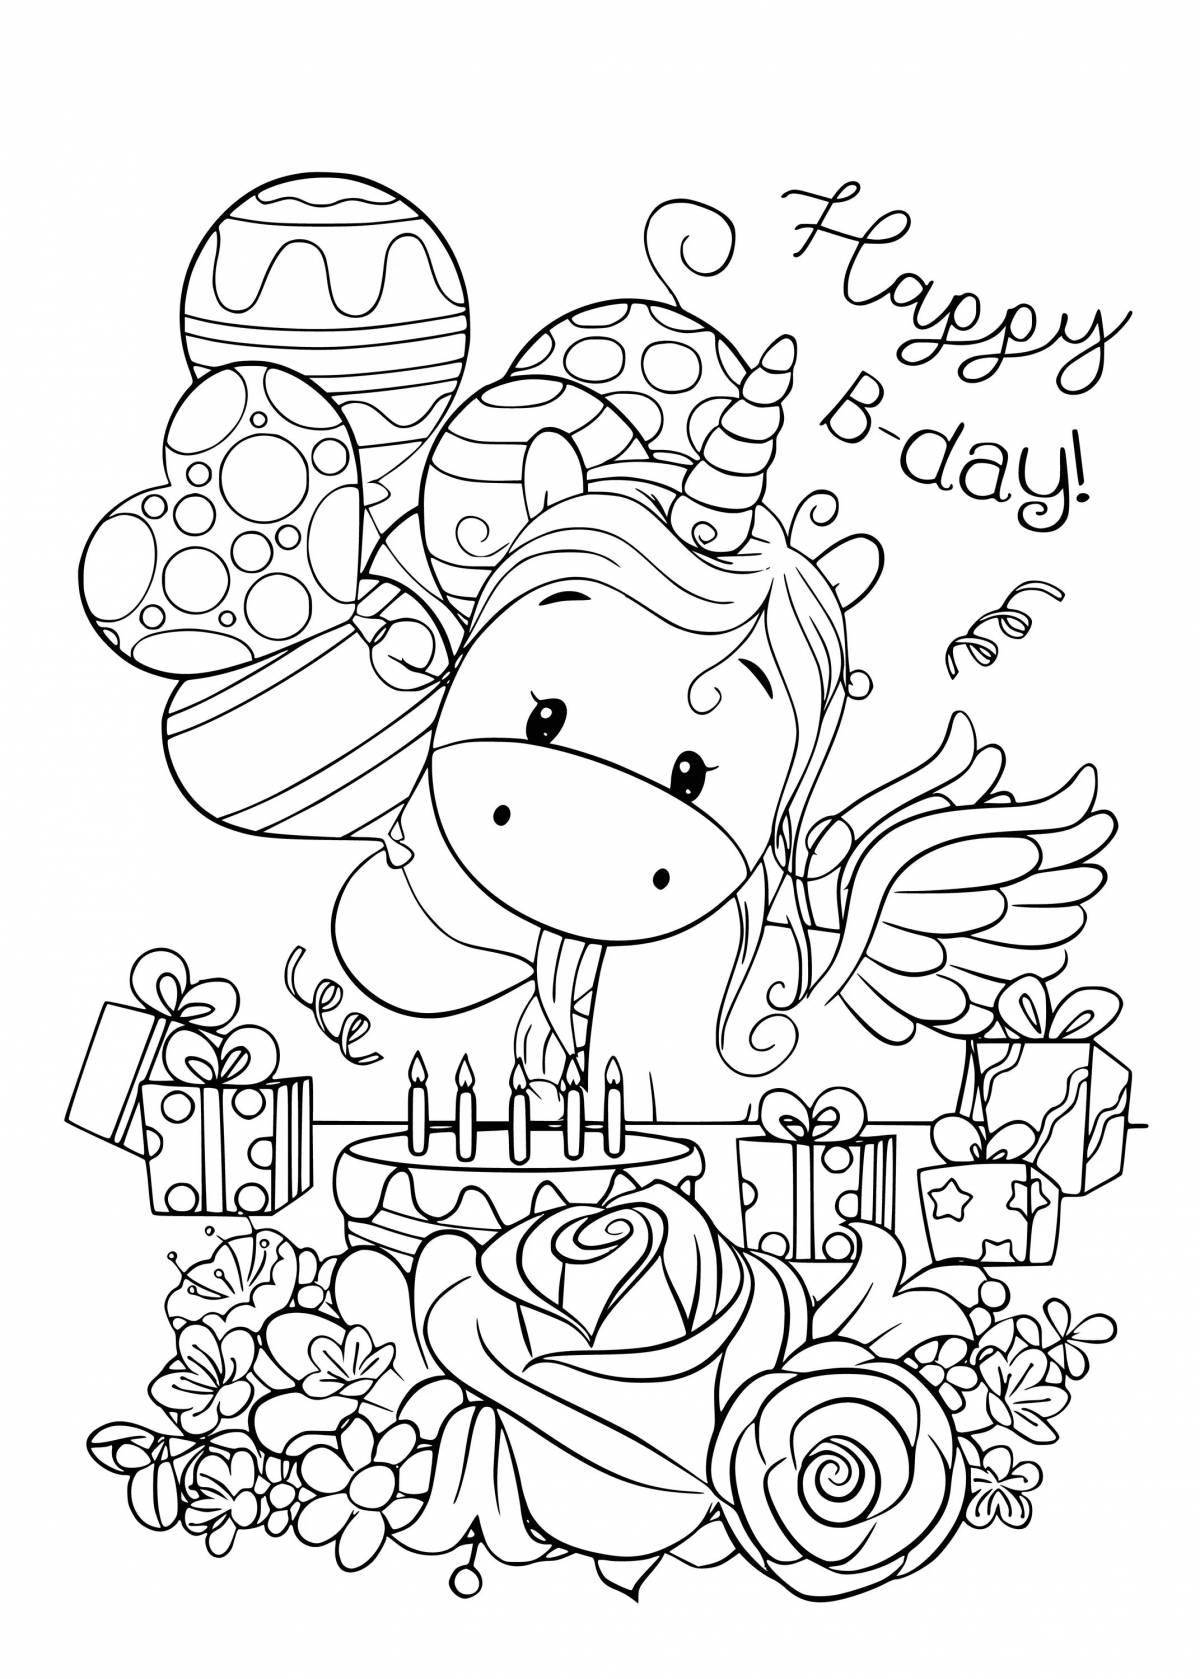 Exciting birthday sister coloring page